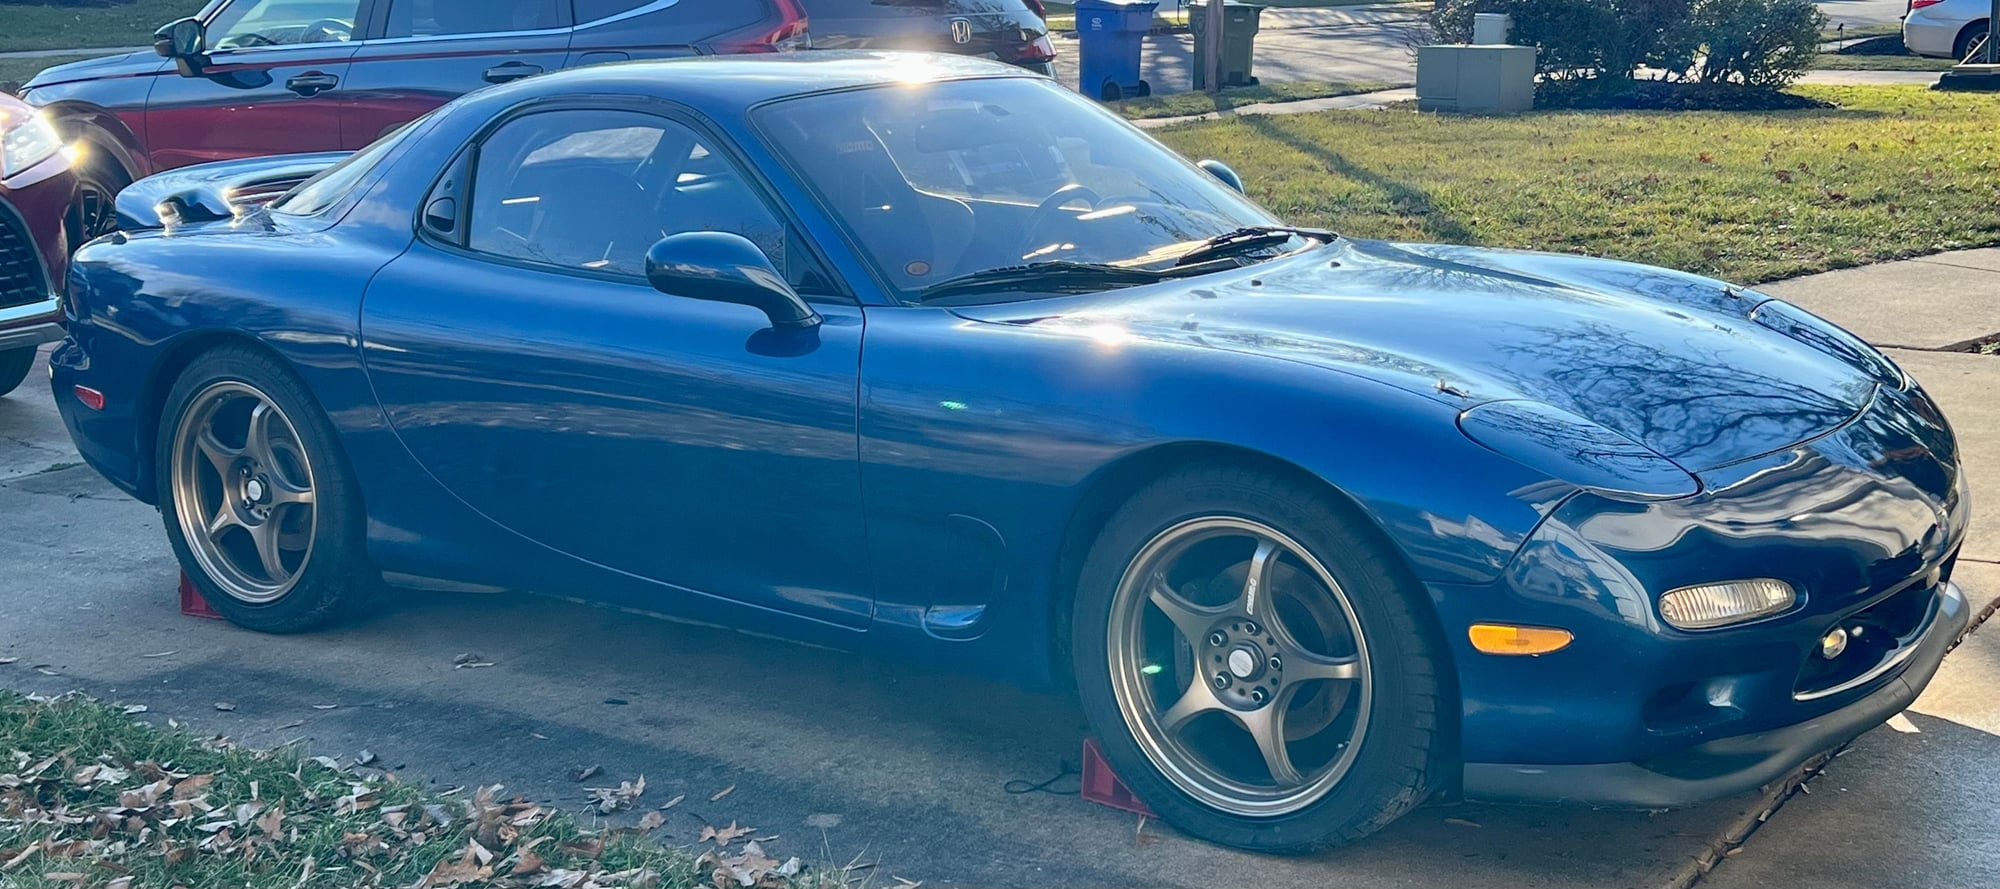 1993 Mazda RX-7 - Dormant 1993 RX7 R1 (Not Running) - Used - VIN JM1FD3319P0206142 - 90,000 Miles - 2WD - Manual - Coupe - Blue - Cherry Hill, NJ 08003, United States